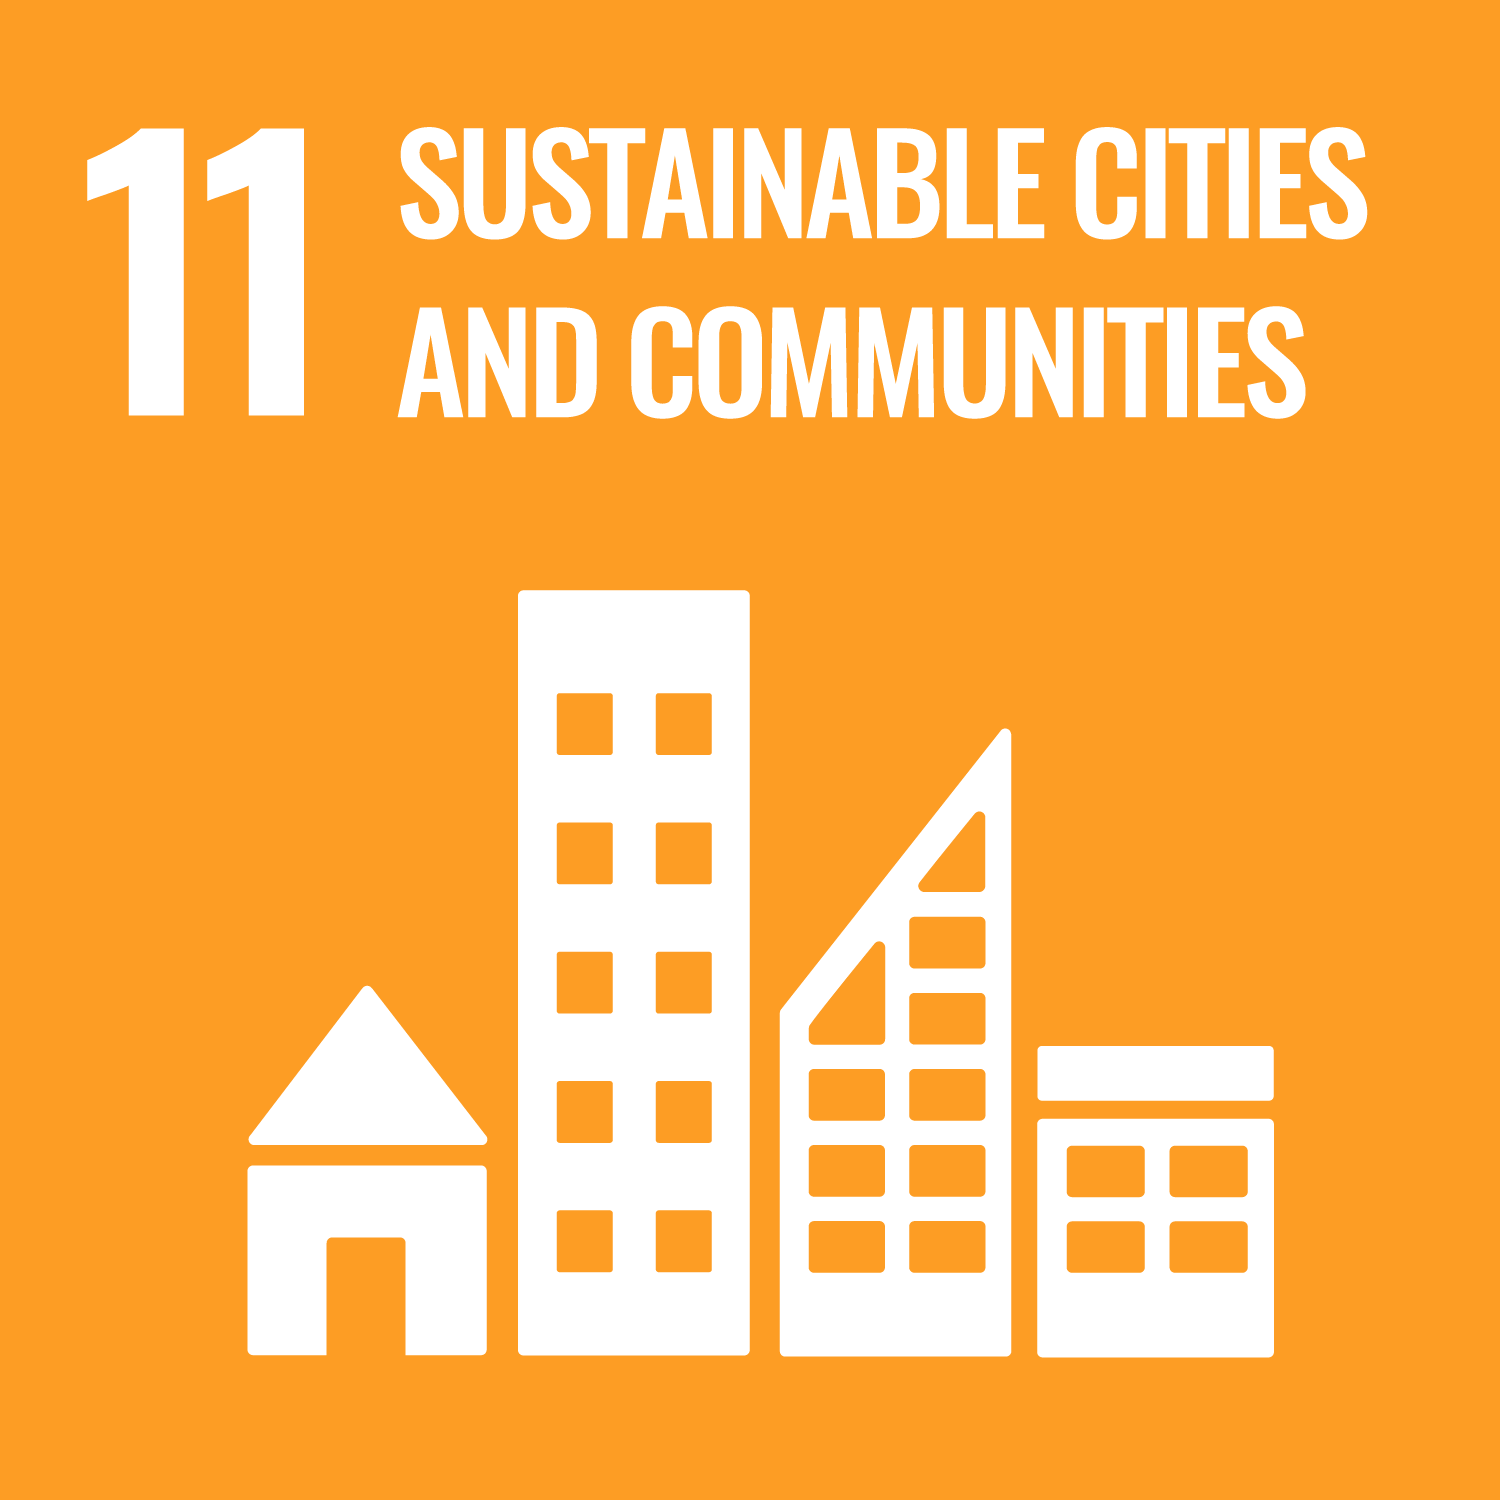 11. sustainable cities and communitues